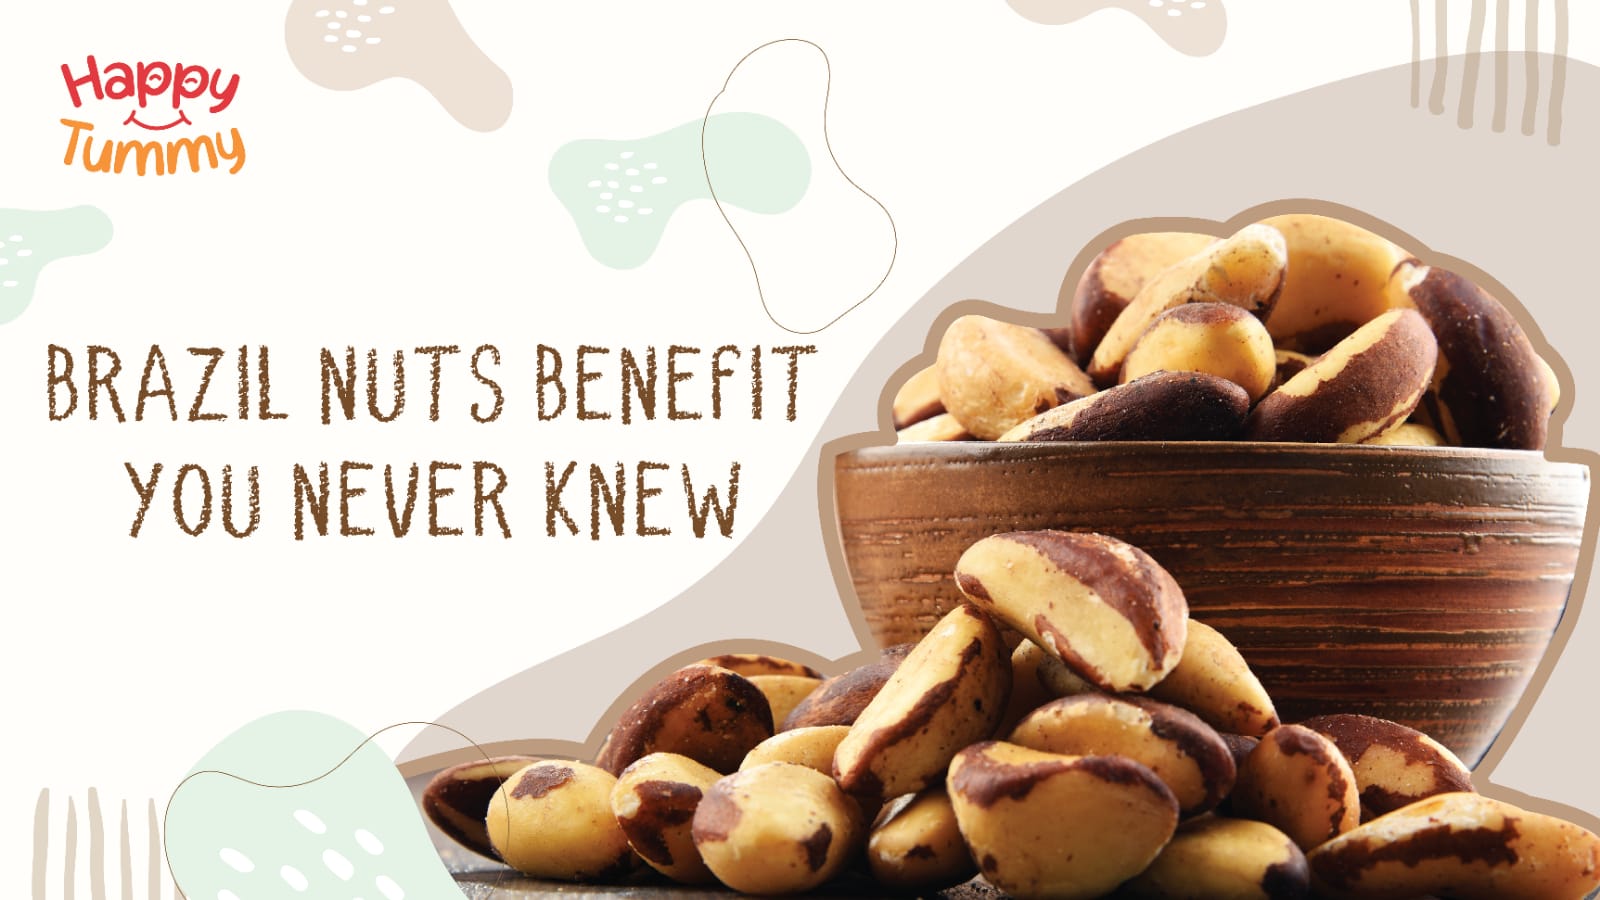 Brazil nuts benefit you never knew